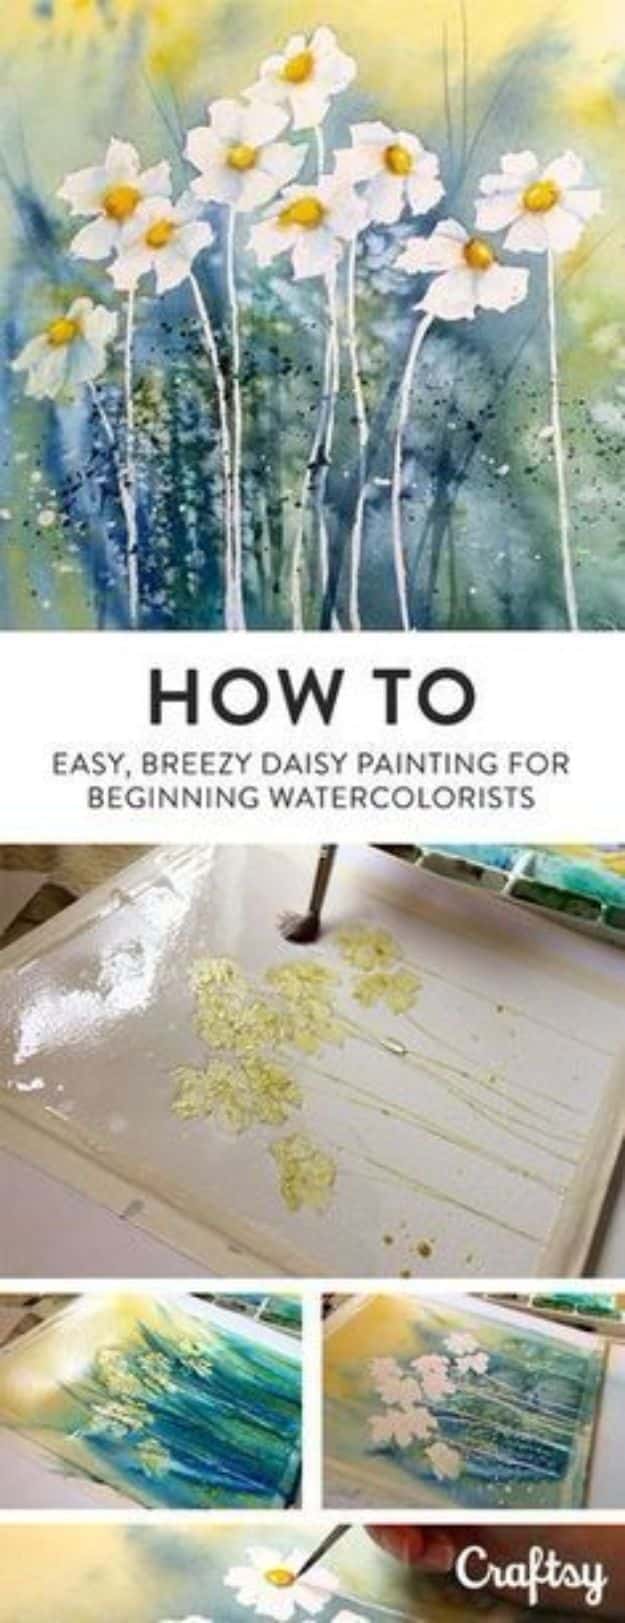 Watercolor Tutorials and Techniques - How To Paint A Daisy In Watercolor - How To Paint With Watercolor - Make Watercolor Flowers, Ocean, Sky, Abstract People, Landscapes, Buildings, Animals, Portraits, Sunset - Step by Step Art Lessons for Beginners - Easy Video Tutorials and How To for Watercolors and Paint Washes #art 